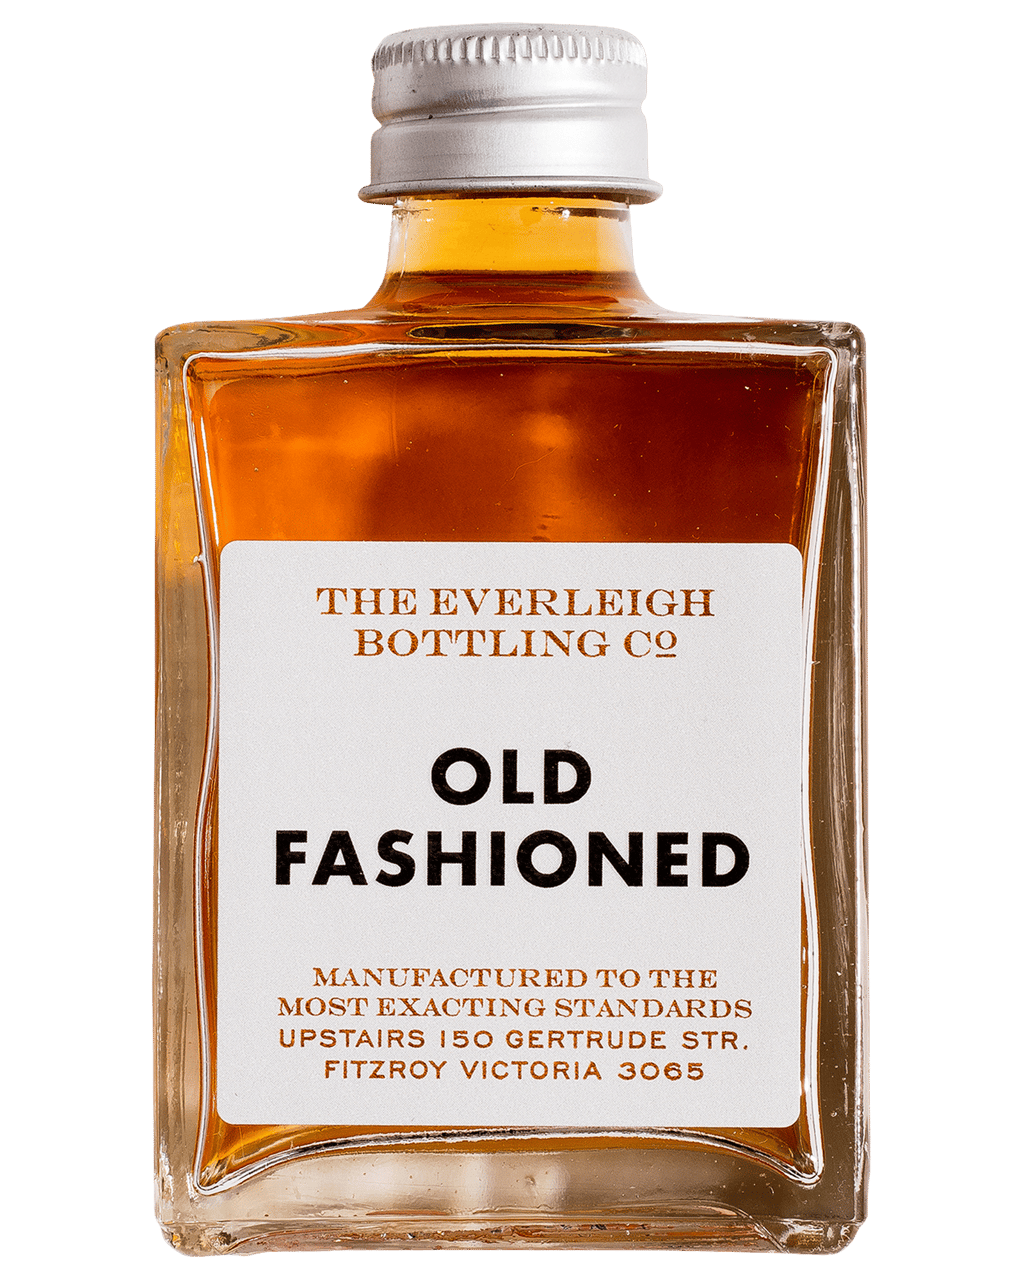 The Everleigh Bottling Co. Old Fashioned bottled cocktail () - Boozy